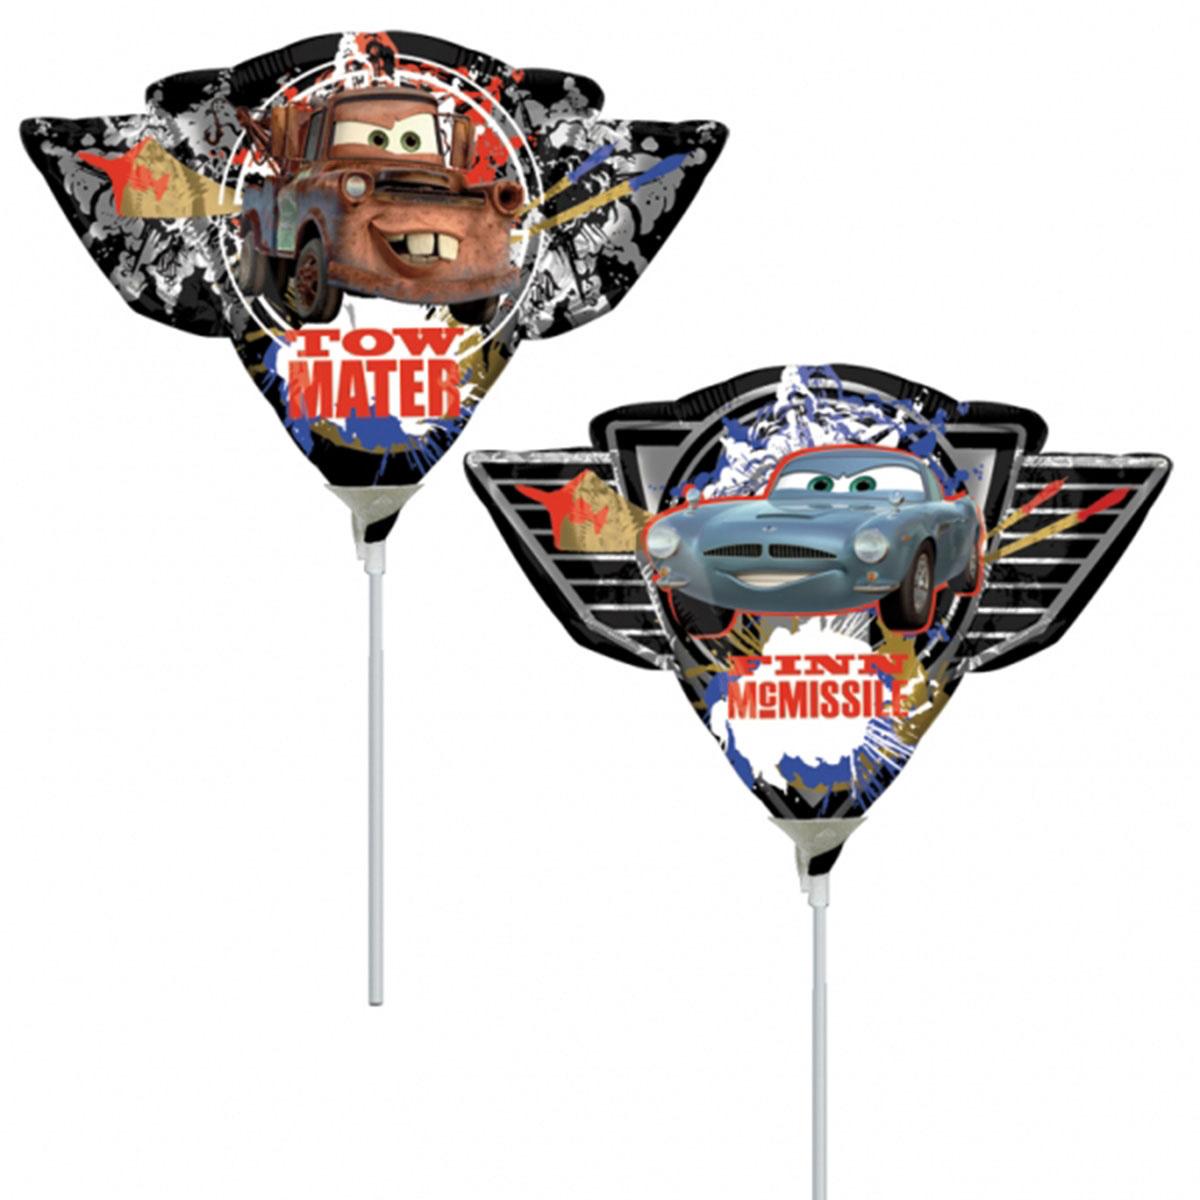 Finn McMissile/Tow Mater Mini Shape Balloon Balloons & Streamers - Party Centre - Party Centre